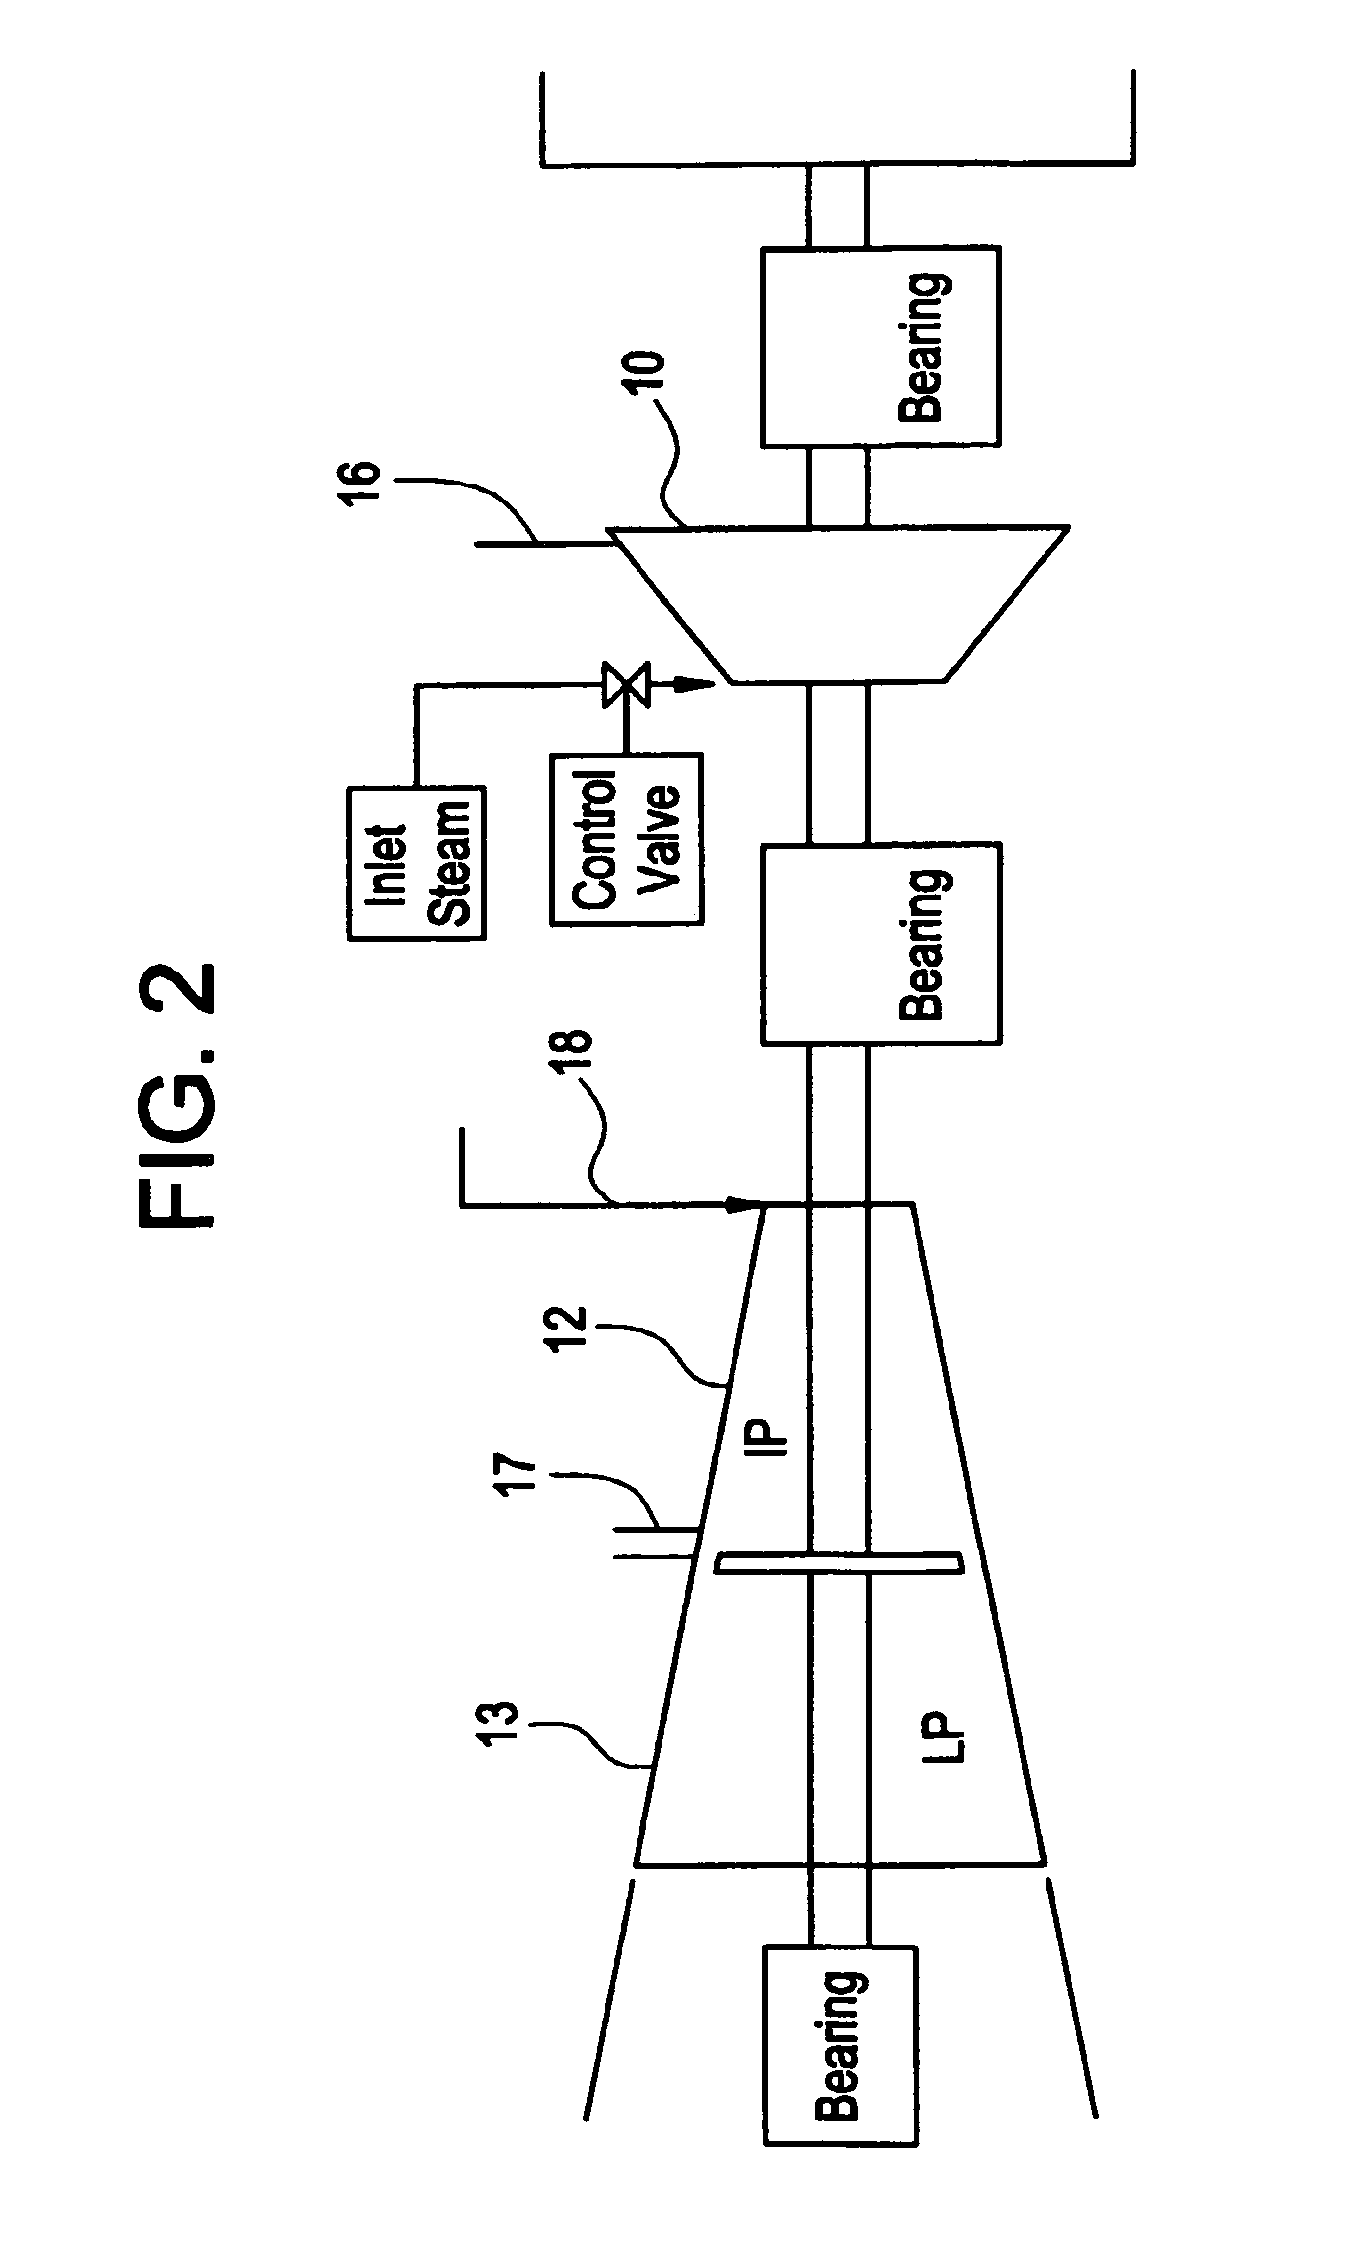 Variable pressure-controlled cooling scheme and thrust control arrangements for a steam turbine